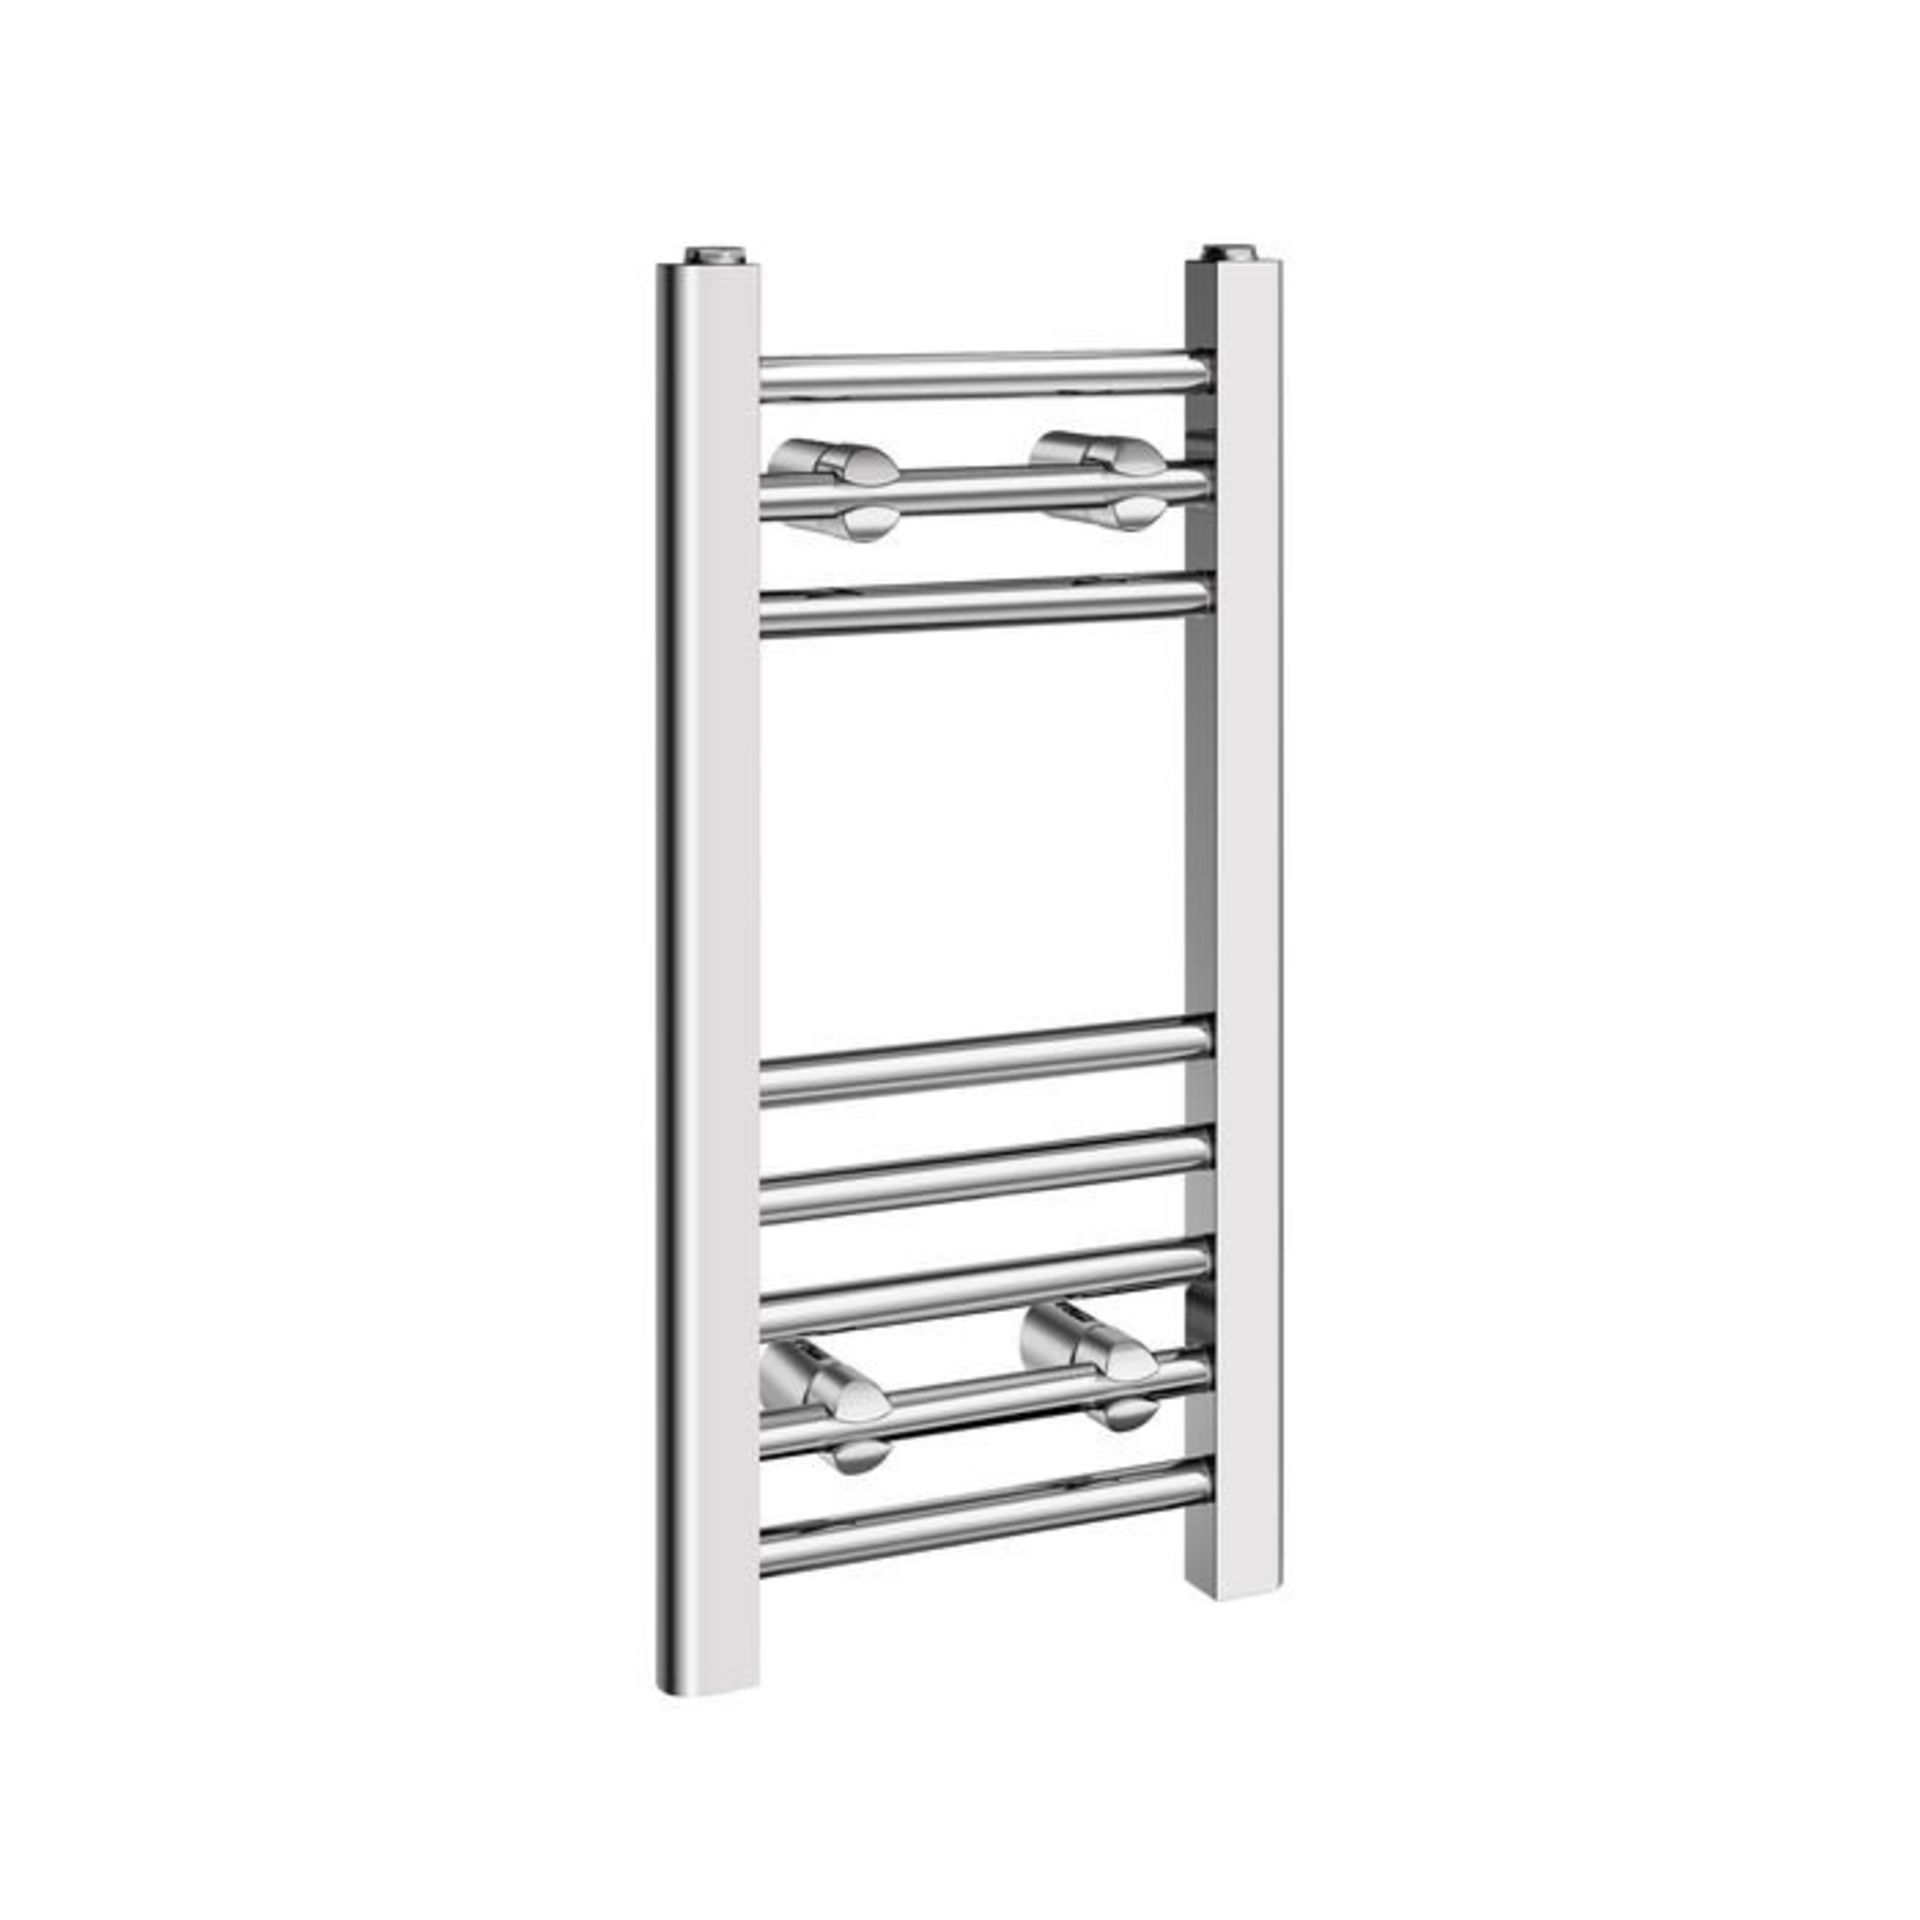 (G2) 600x300mm - 20mm Tubes - Chrome Heated Straight Rail Ladder Towel Rail. Low carbon steel chrome - Image 3 of 3